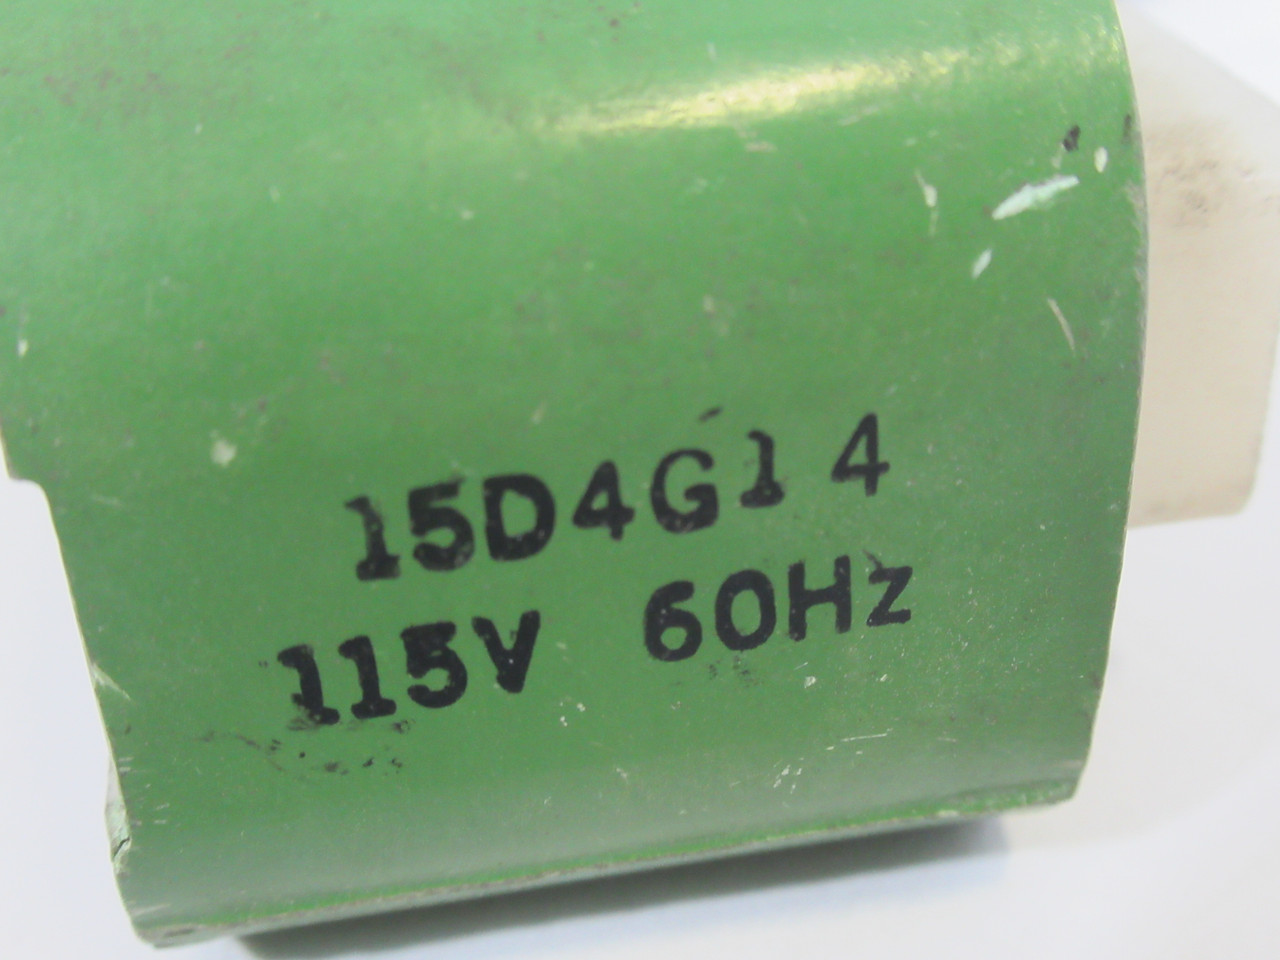 General Electric 15D4G14 Solenoid Coil 115V@60Hz *Cosmetic Damage* USED